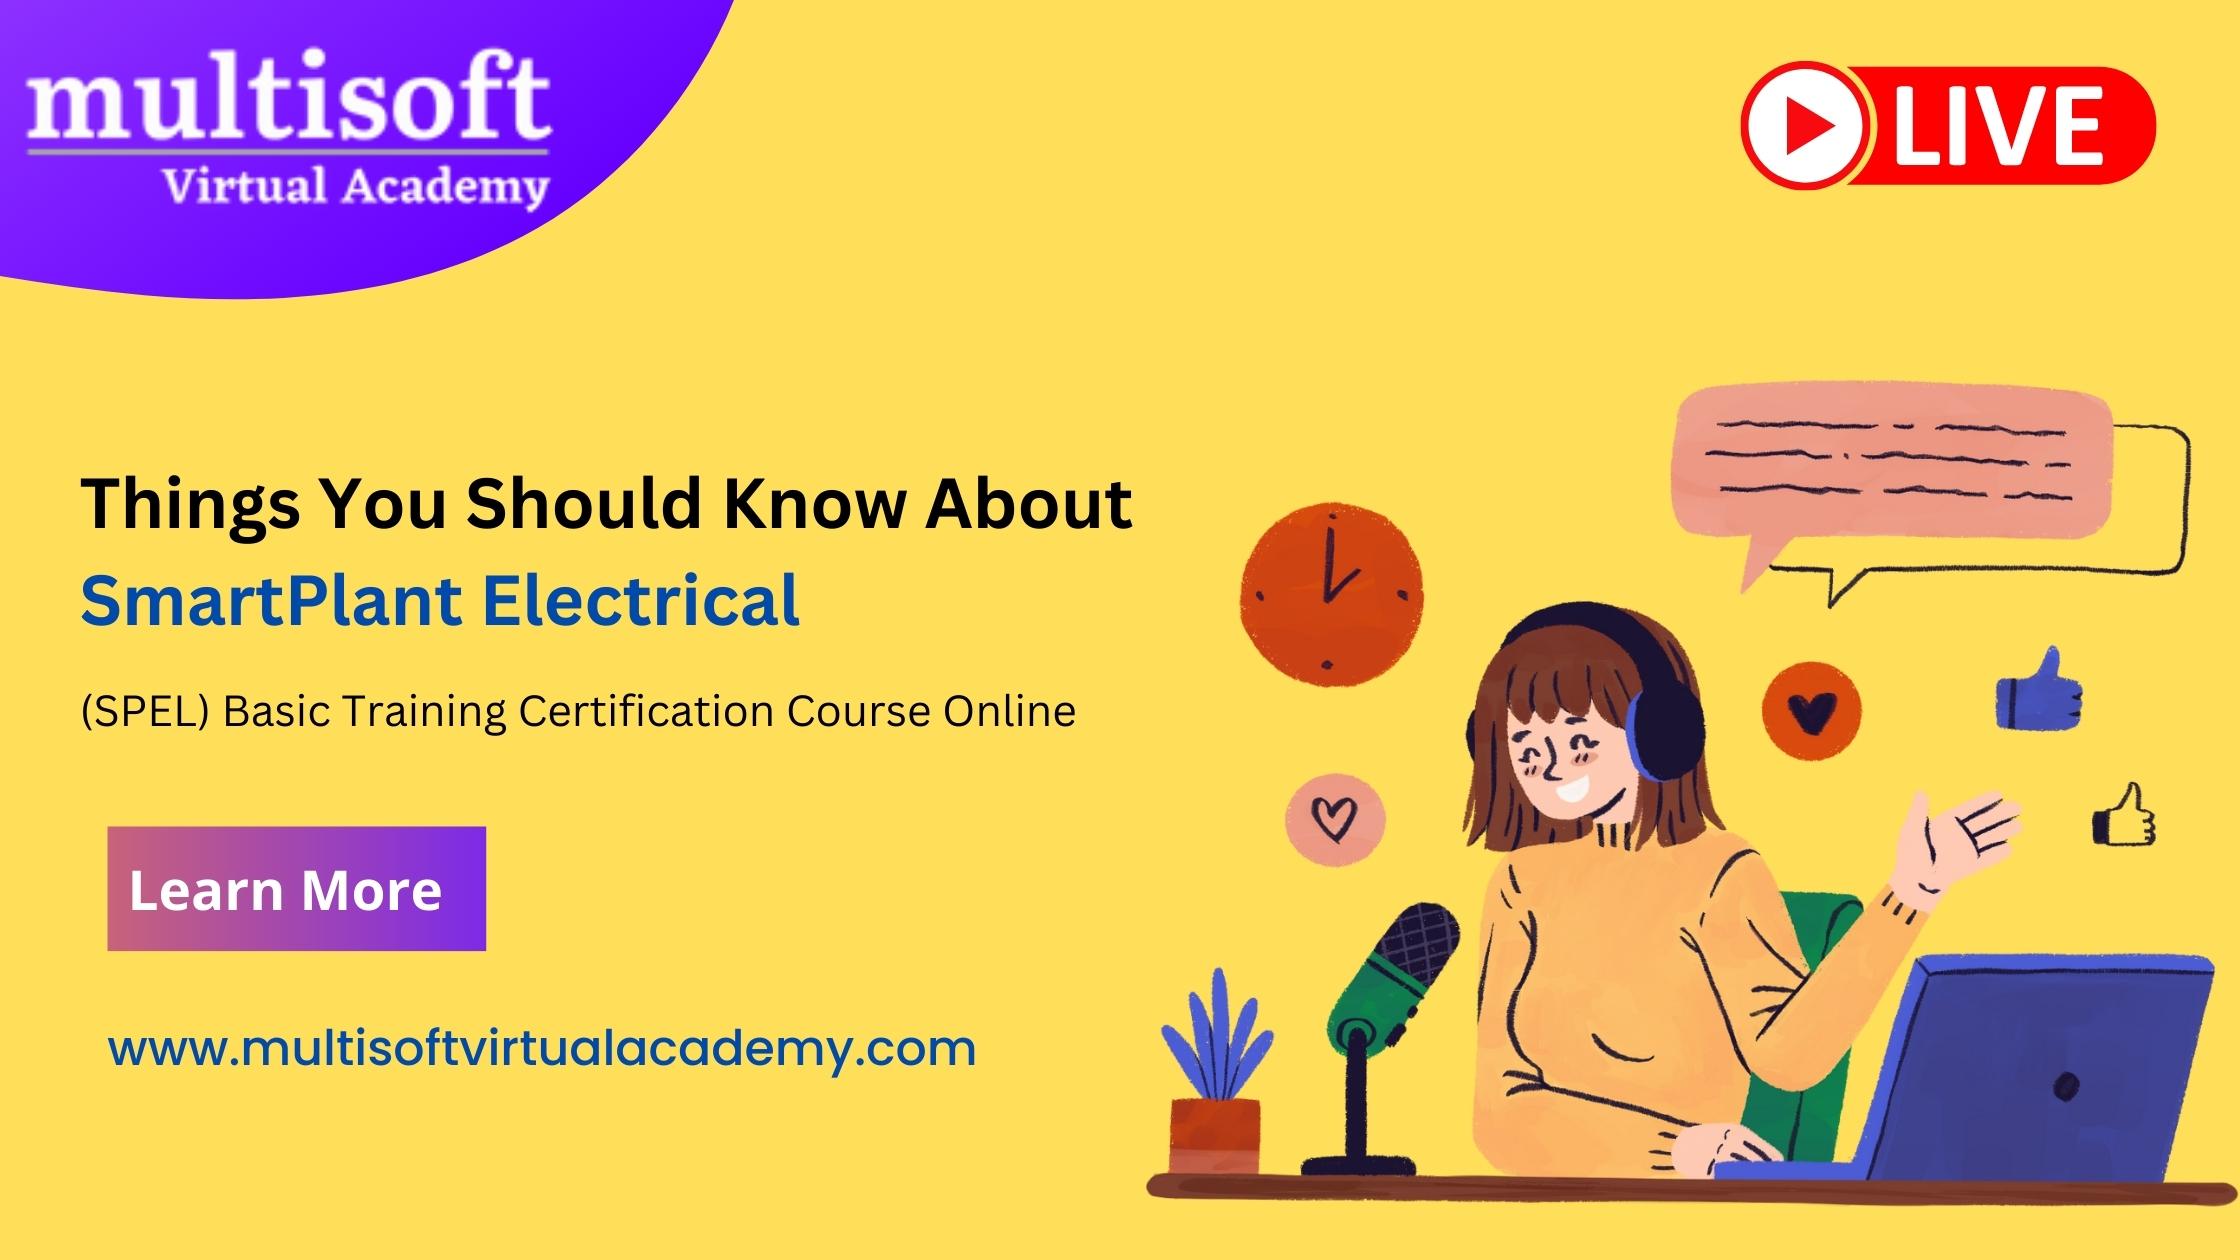 Things You Should Know About SmartPlant Electrical (SPEL) Basic Training Certification Course Online